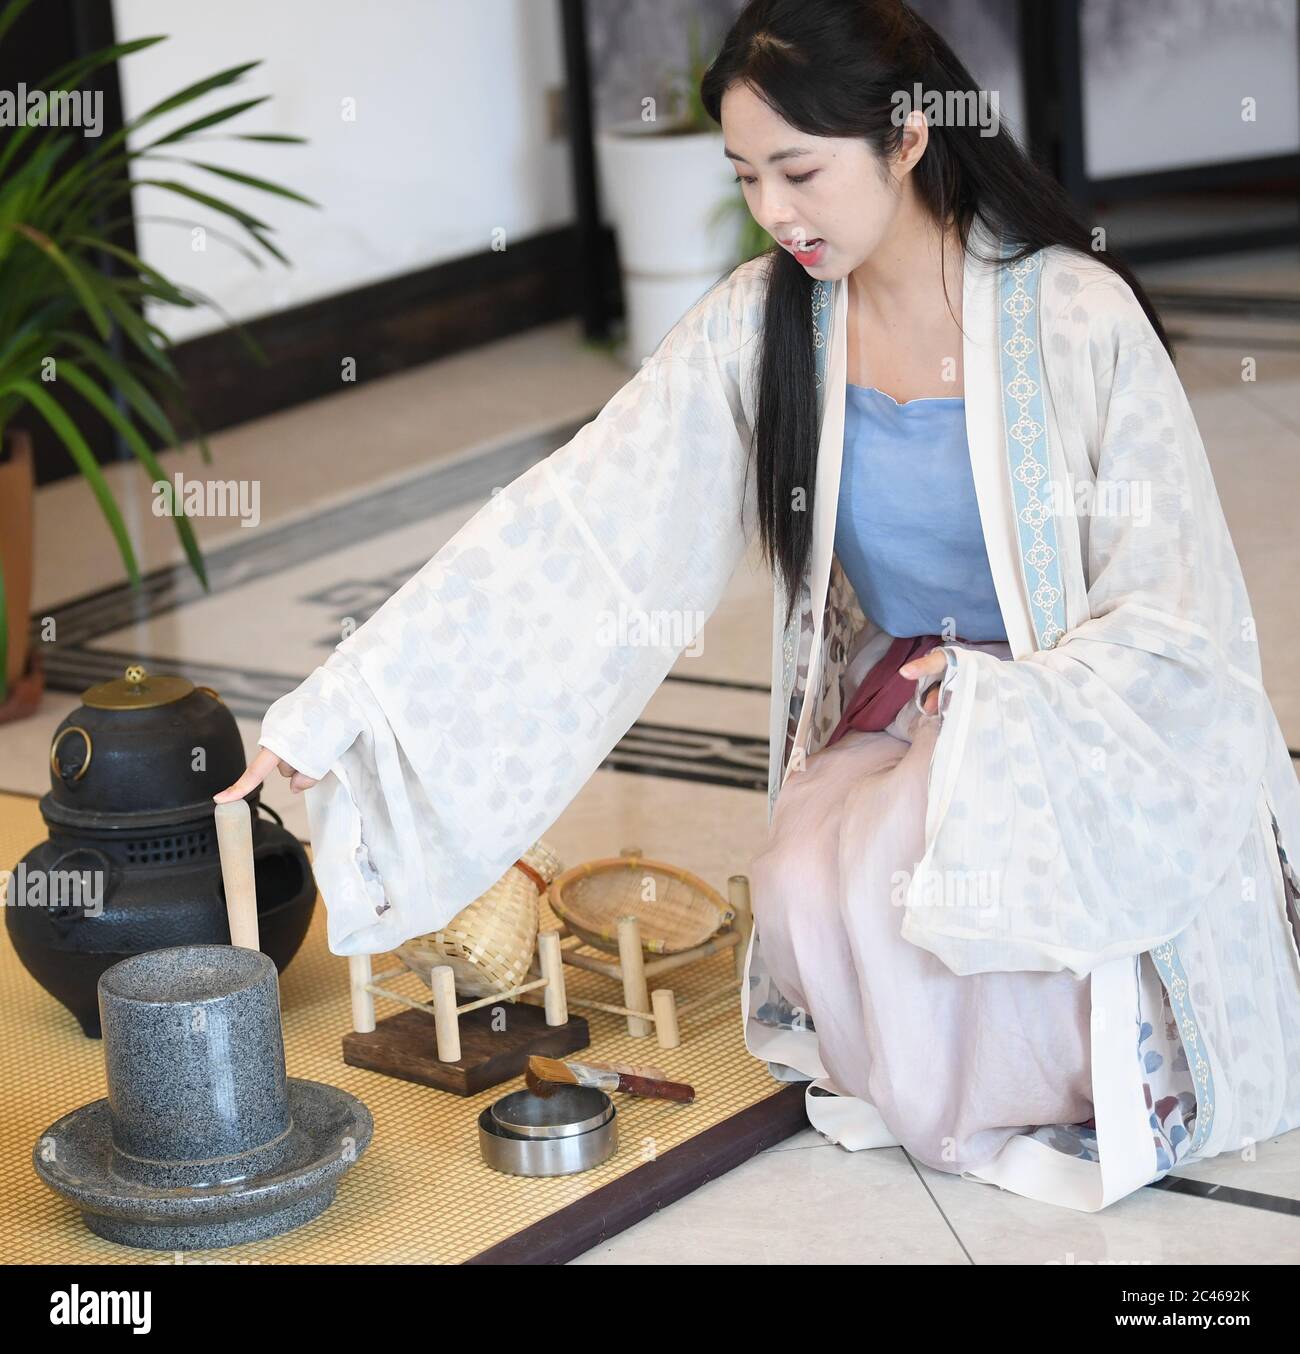 Hangzhou, East China's Zhejiang Province. 23rd June, 2020. Zhou Ying, a local tea master, demonstrates the Jingshan tea ceremony in Jingshan Town, Hangzhou, East China's Zhejiang Province, June 23, 2020. Located in northwest of Hangzhou, Jingshan Temple was once famous for its tea ceremony that was even exported to Japan during the period of 1127 to 1279. Today, the locals are working hard to restructure the temple, bringing out revival of the tea ceremony. Credit: Weng Xinyang/Xinhua/Alamy Live News Stock Photo